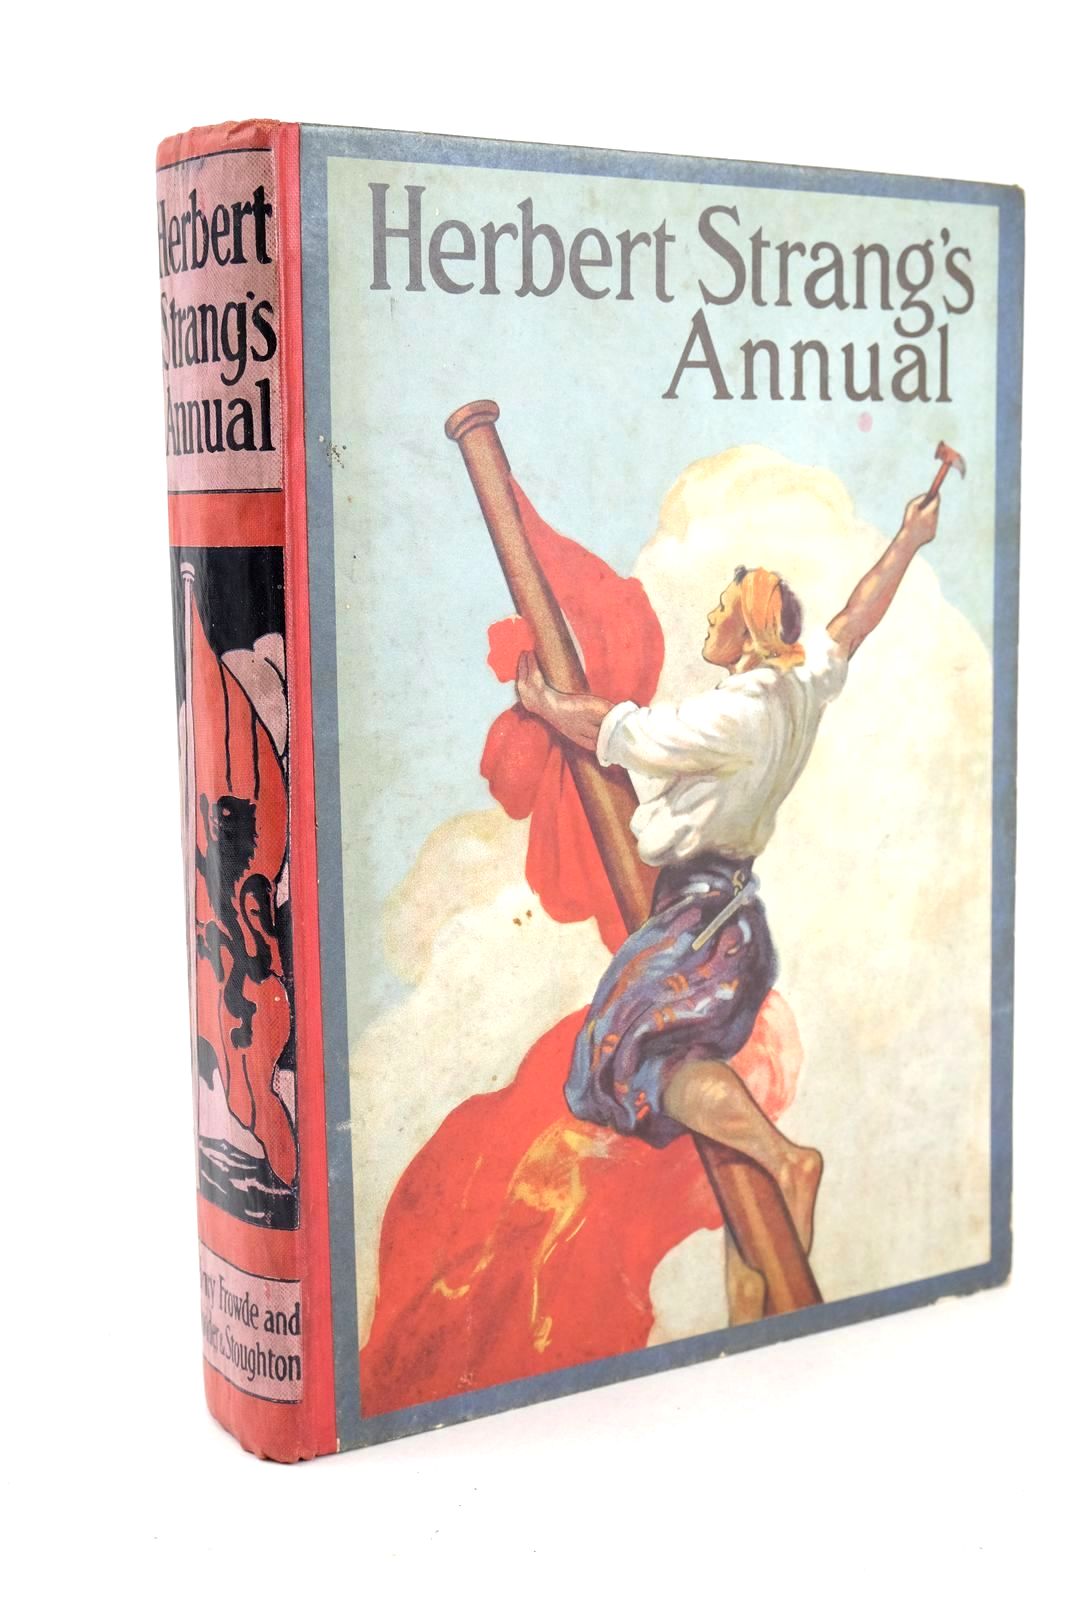 Photo of HERBERT STRANG'S ANNUAL 1910 written by Strang, Herbert Bevan, Tom Gilson, Captain Charles Rhoades, Walter C. Lushington, Guy et al, illustrated by Brock, H.M. Cuneo, Cyrus Edwards, Lionel Robinson, Gordon Robinson, T.H. Dugdale, T.C. et al., published by Hodder &amp; Stoughton, Henry Frowde (STOCK CODE: 1325851)  for sale by Stella & Rose's Books